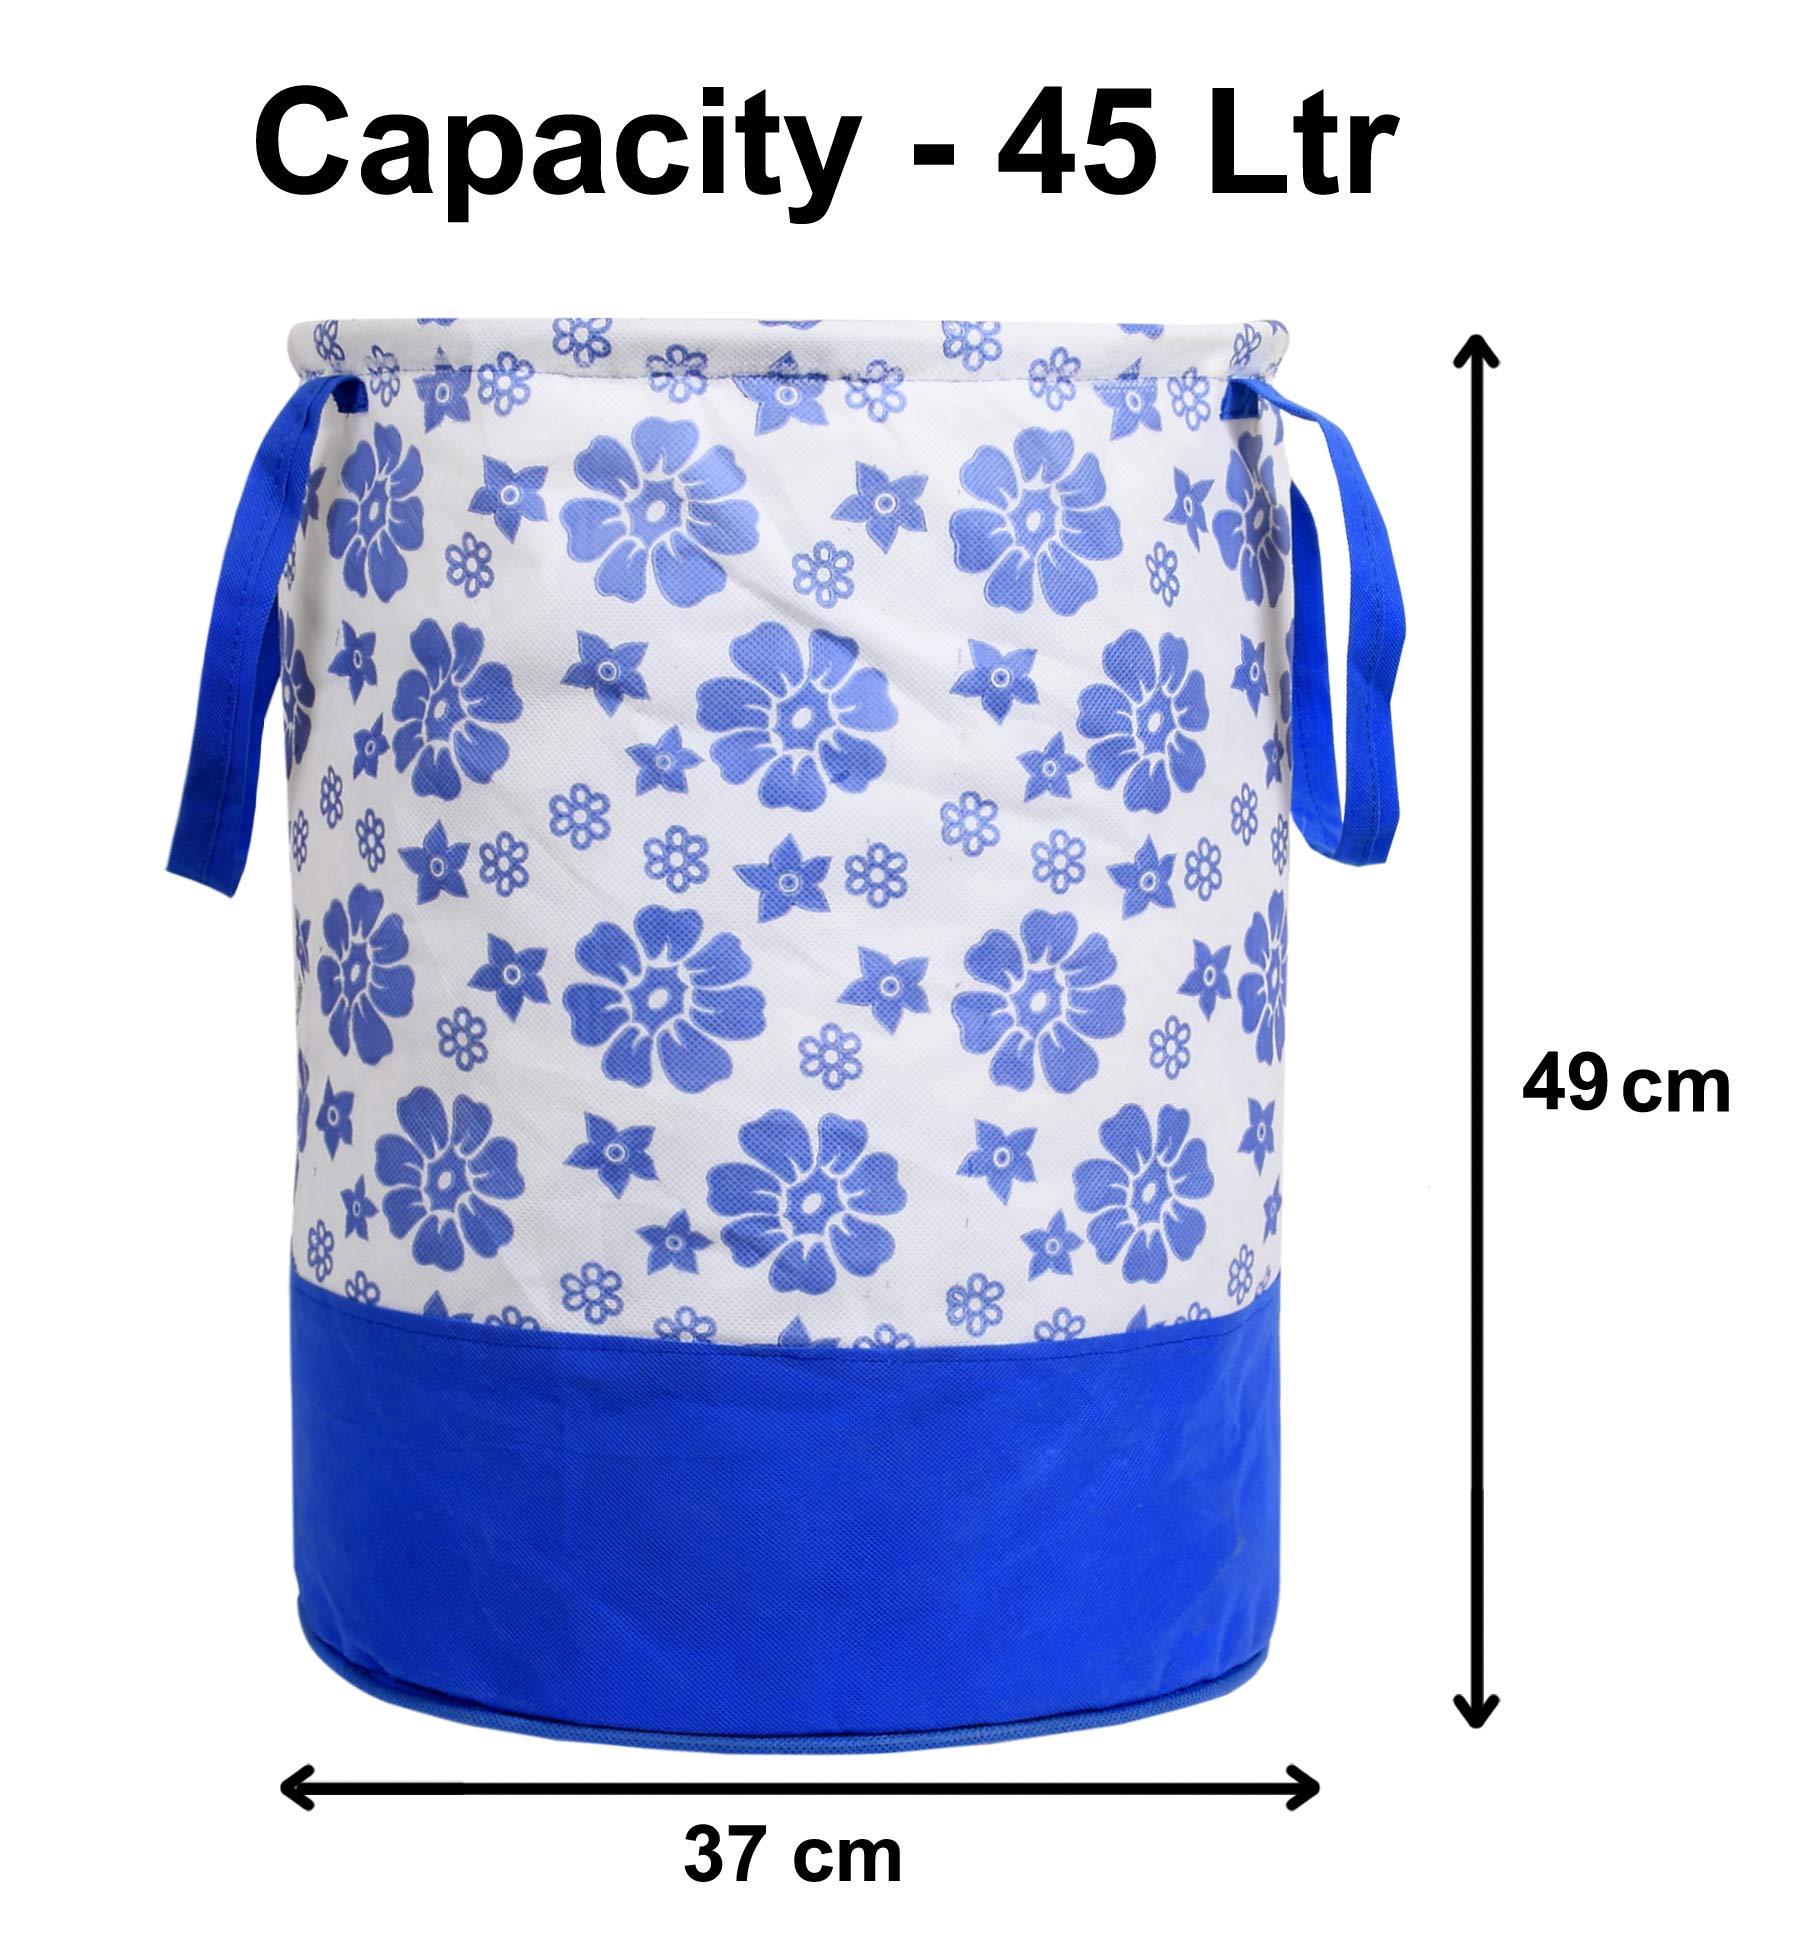 Heart Home Flower Print Round Non Woven Fabric Foldable Laundry Basket, Toy Storage Basket, Cloth Storage Basket With Handles,45 Ltr (Blue)-HEARTXY11608